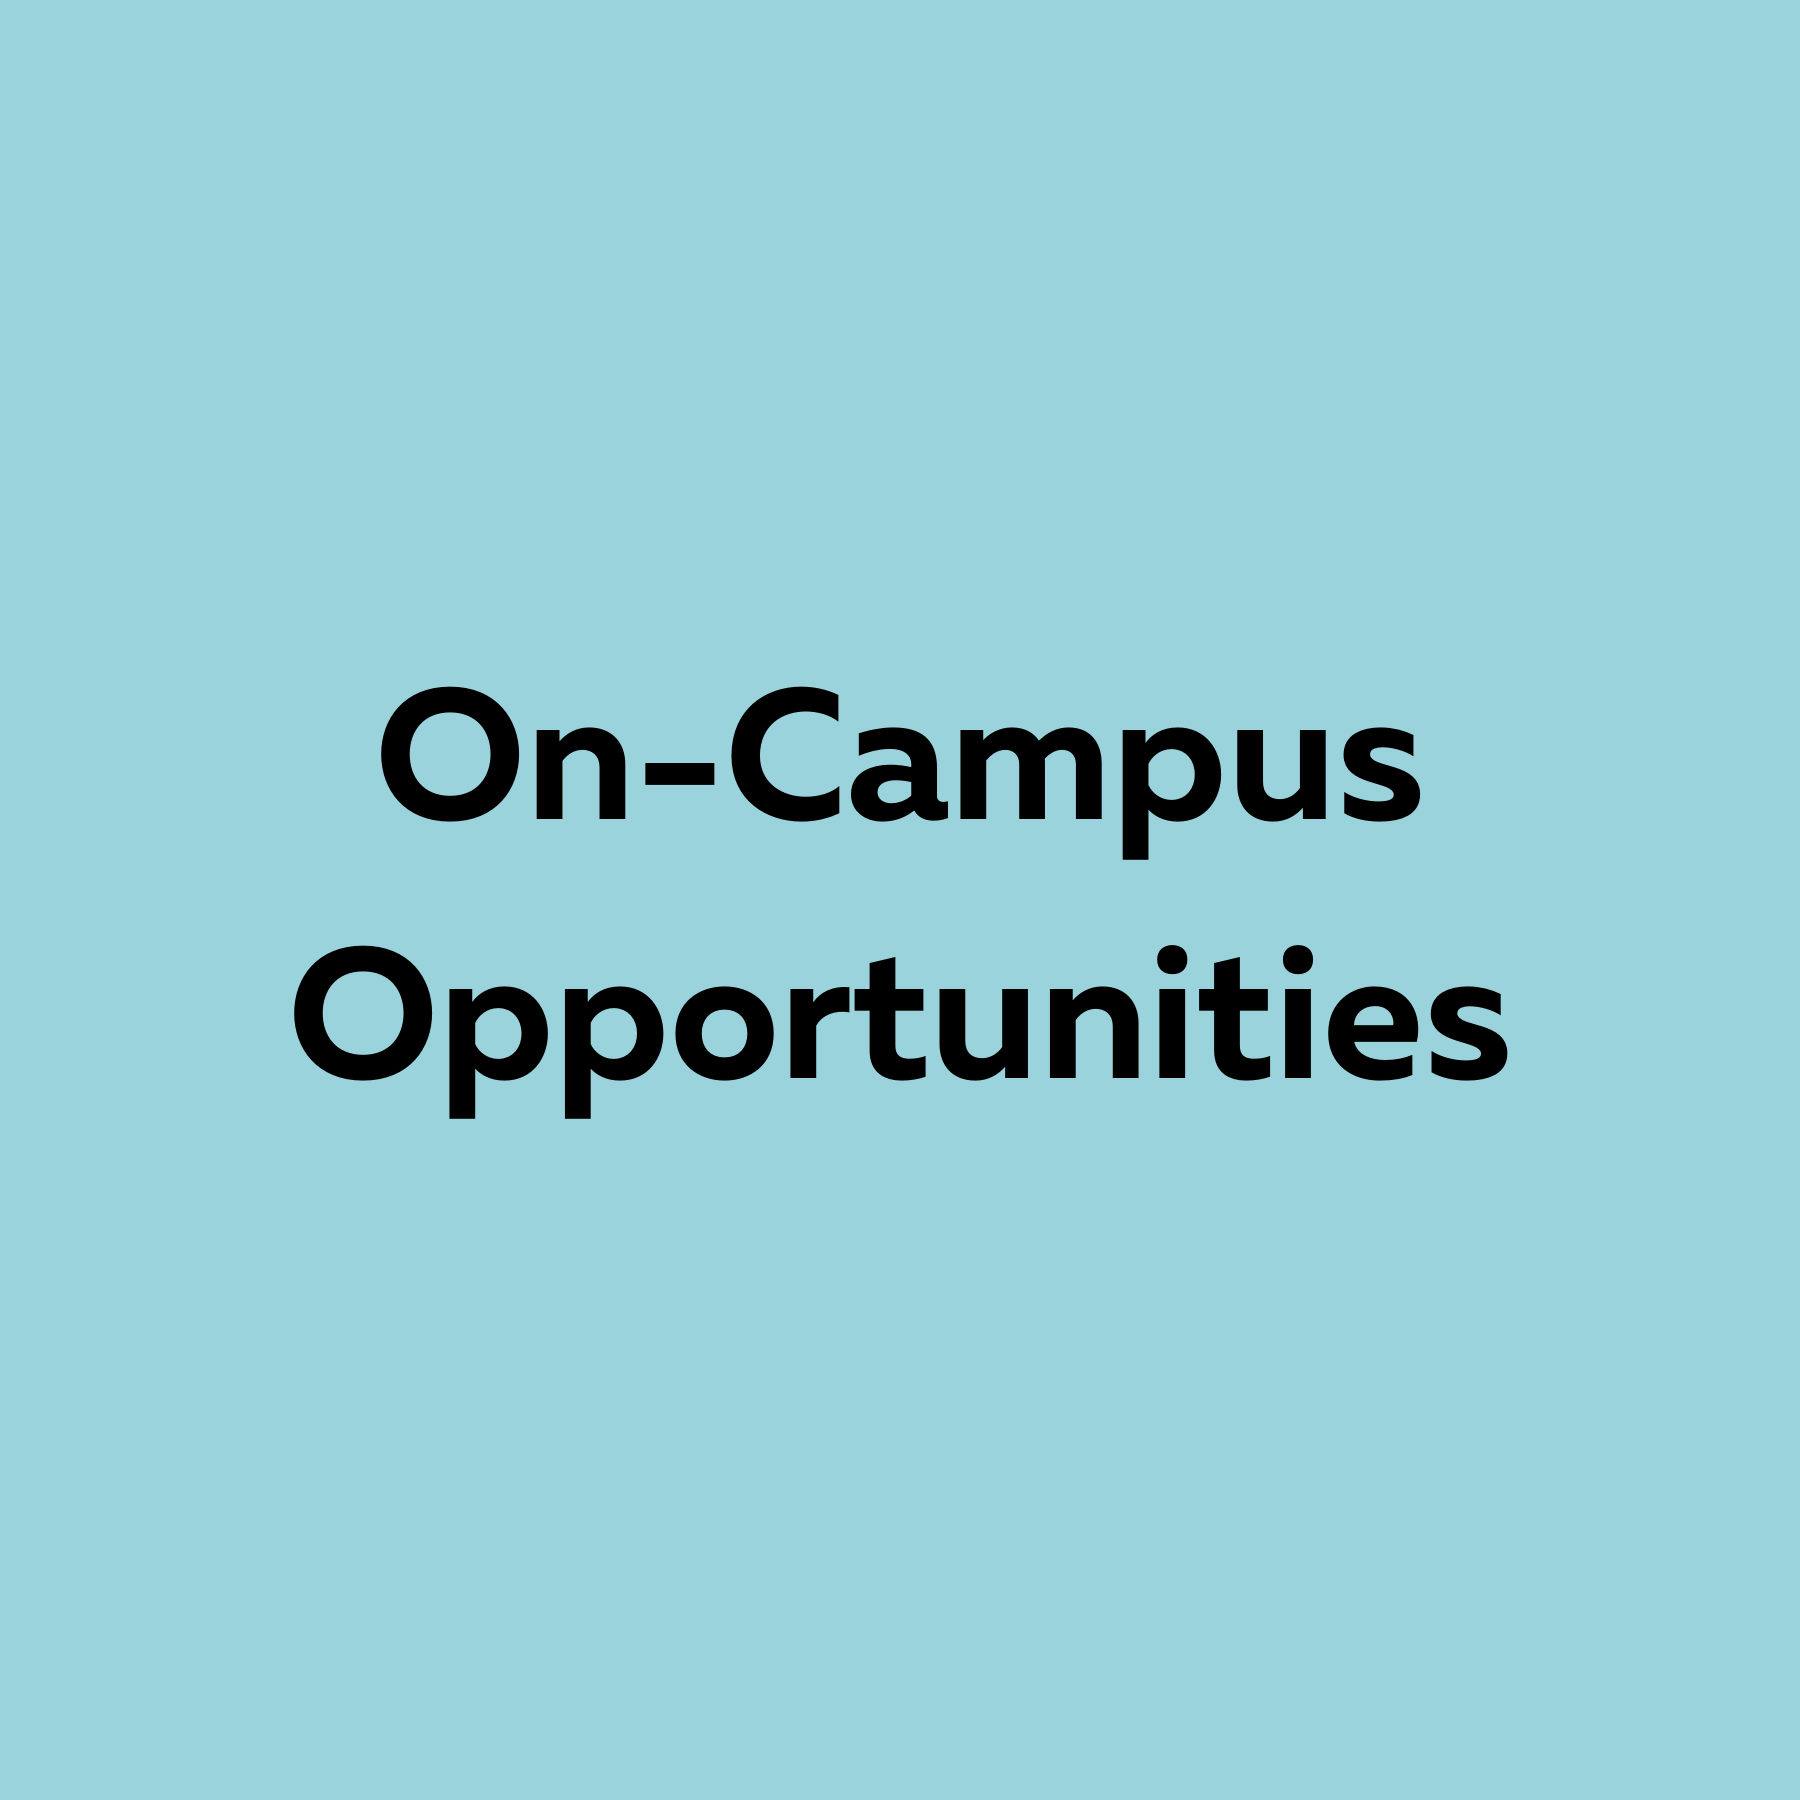 On-Campus Opportunities